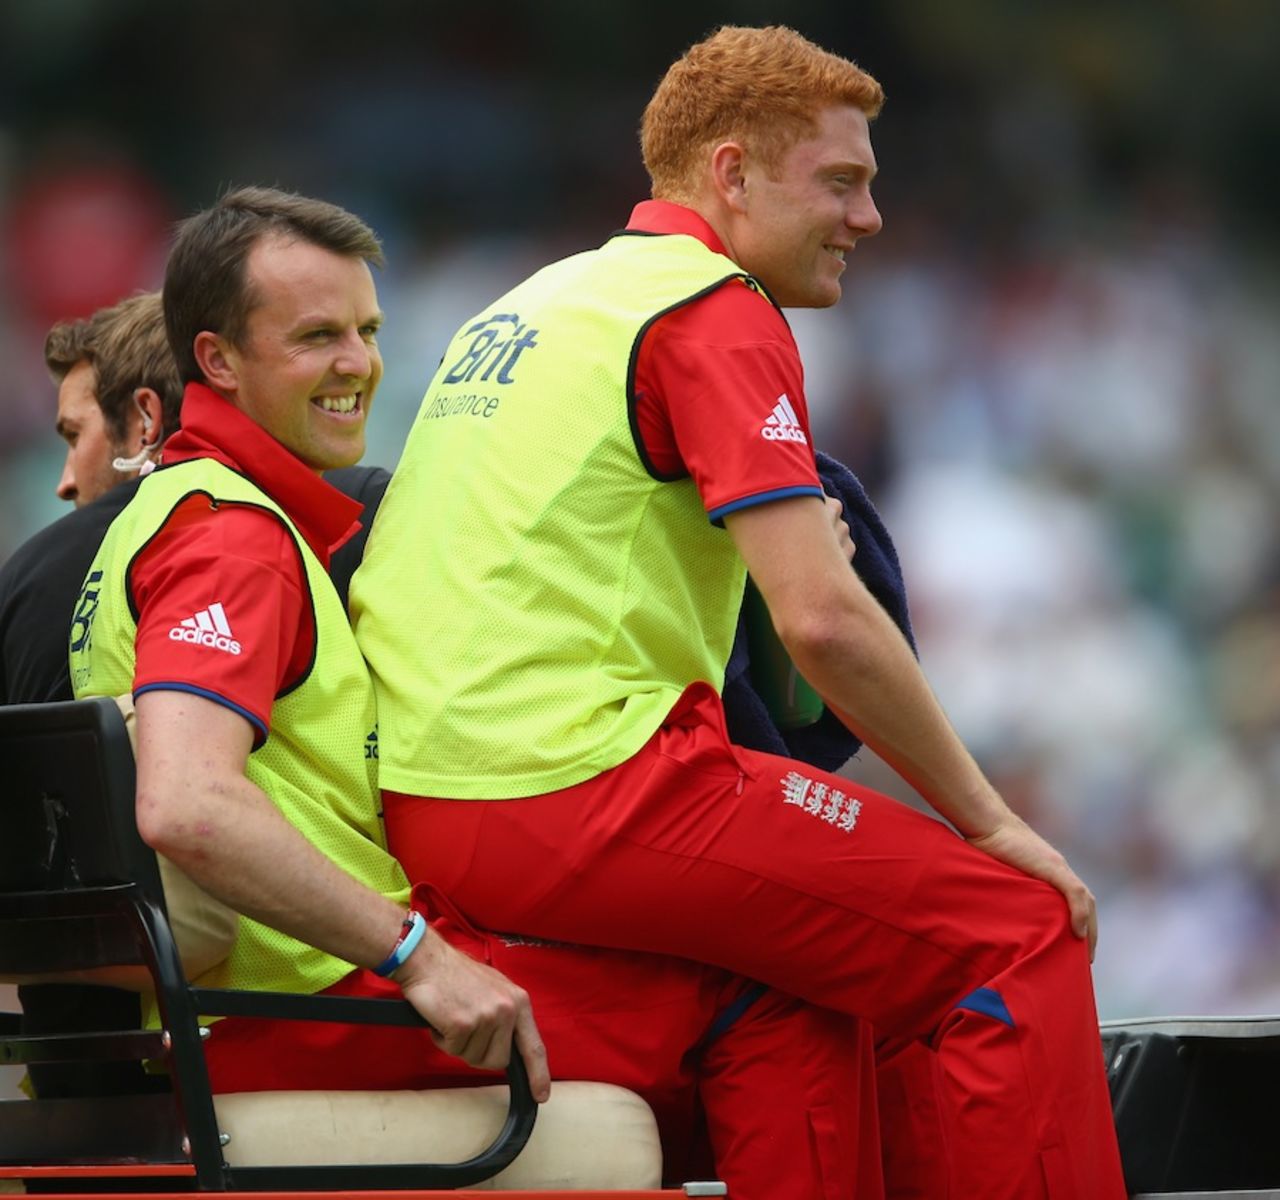 Graeme Swann and Jonny Bairstow enjoy their time during the match, England v South Africa, 1st semi-final, Champions Trophy, The Oval, June 19, 2013